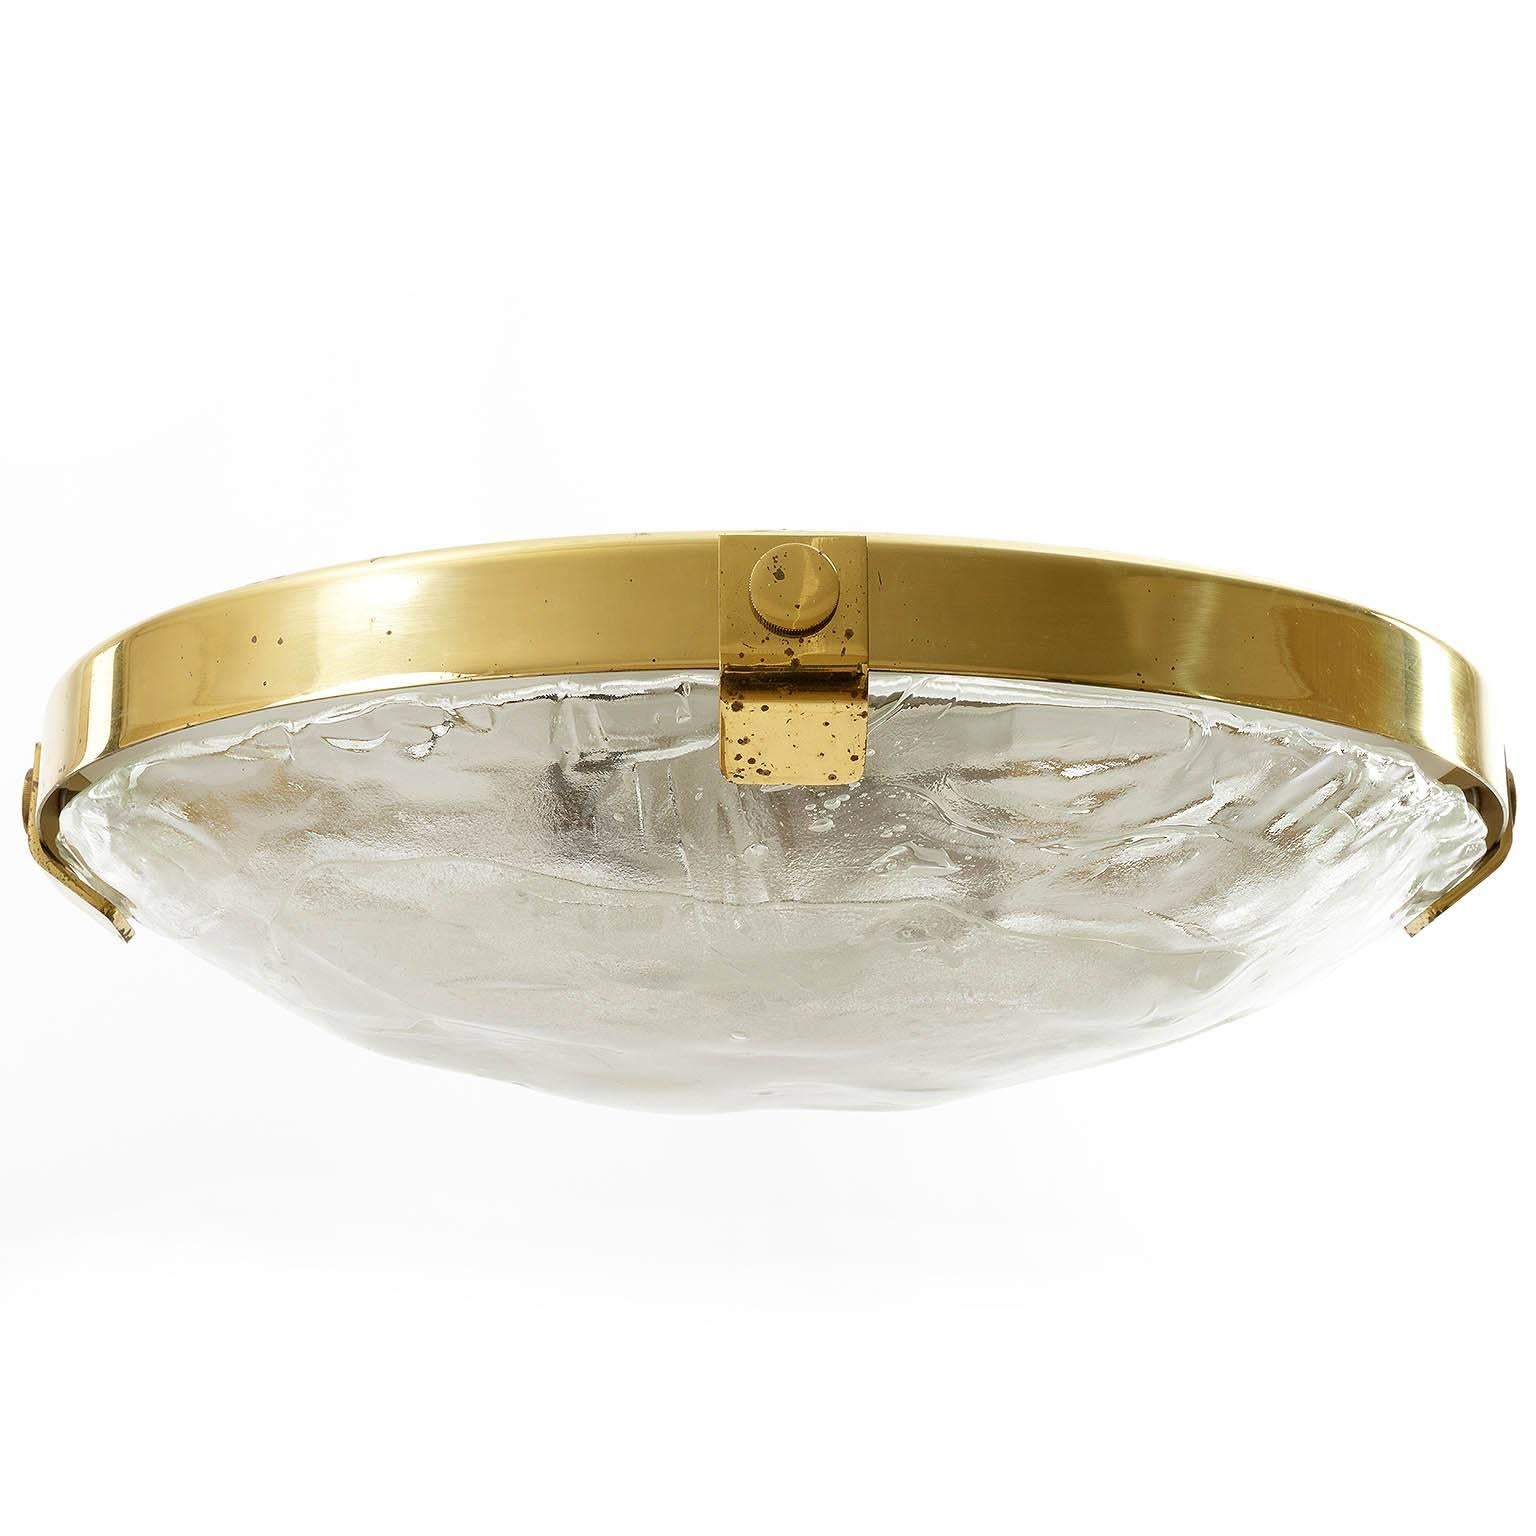 One of two brass and Murano glass flushmount light fixtures by Kalmar, manufactured in midcentury, circa 1970 (late 1960s or early 1970s).
Each fixture is made of a brass ring which holds a large hand blown glass with four brass brackets. The glass